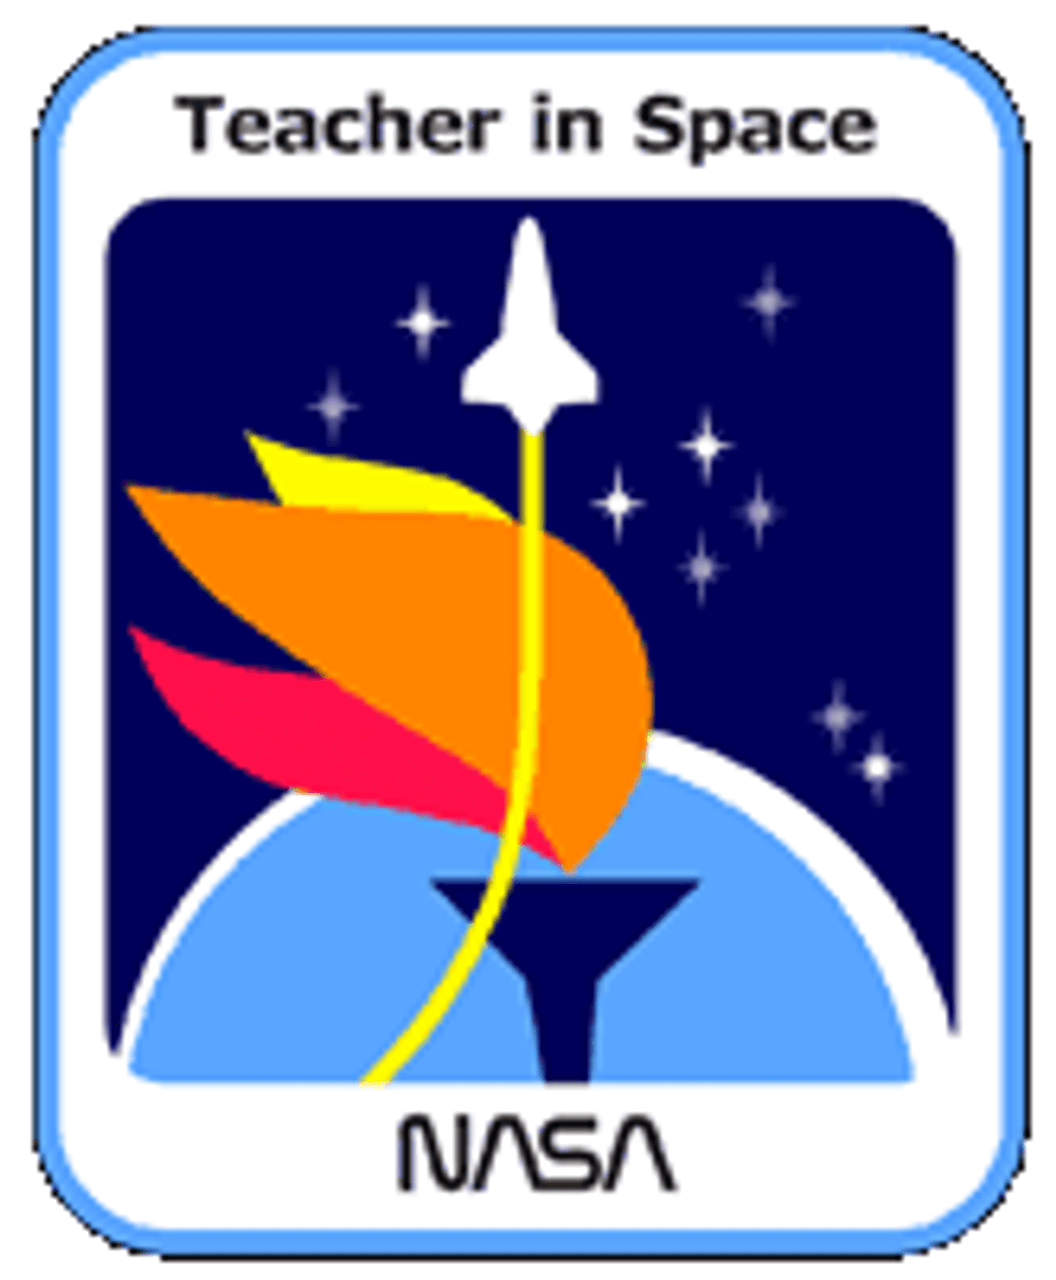 Teacher in Space mission patch